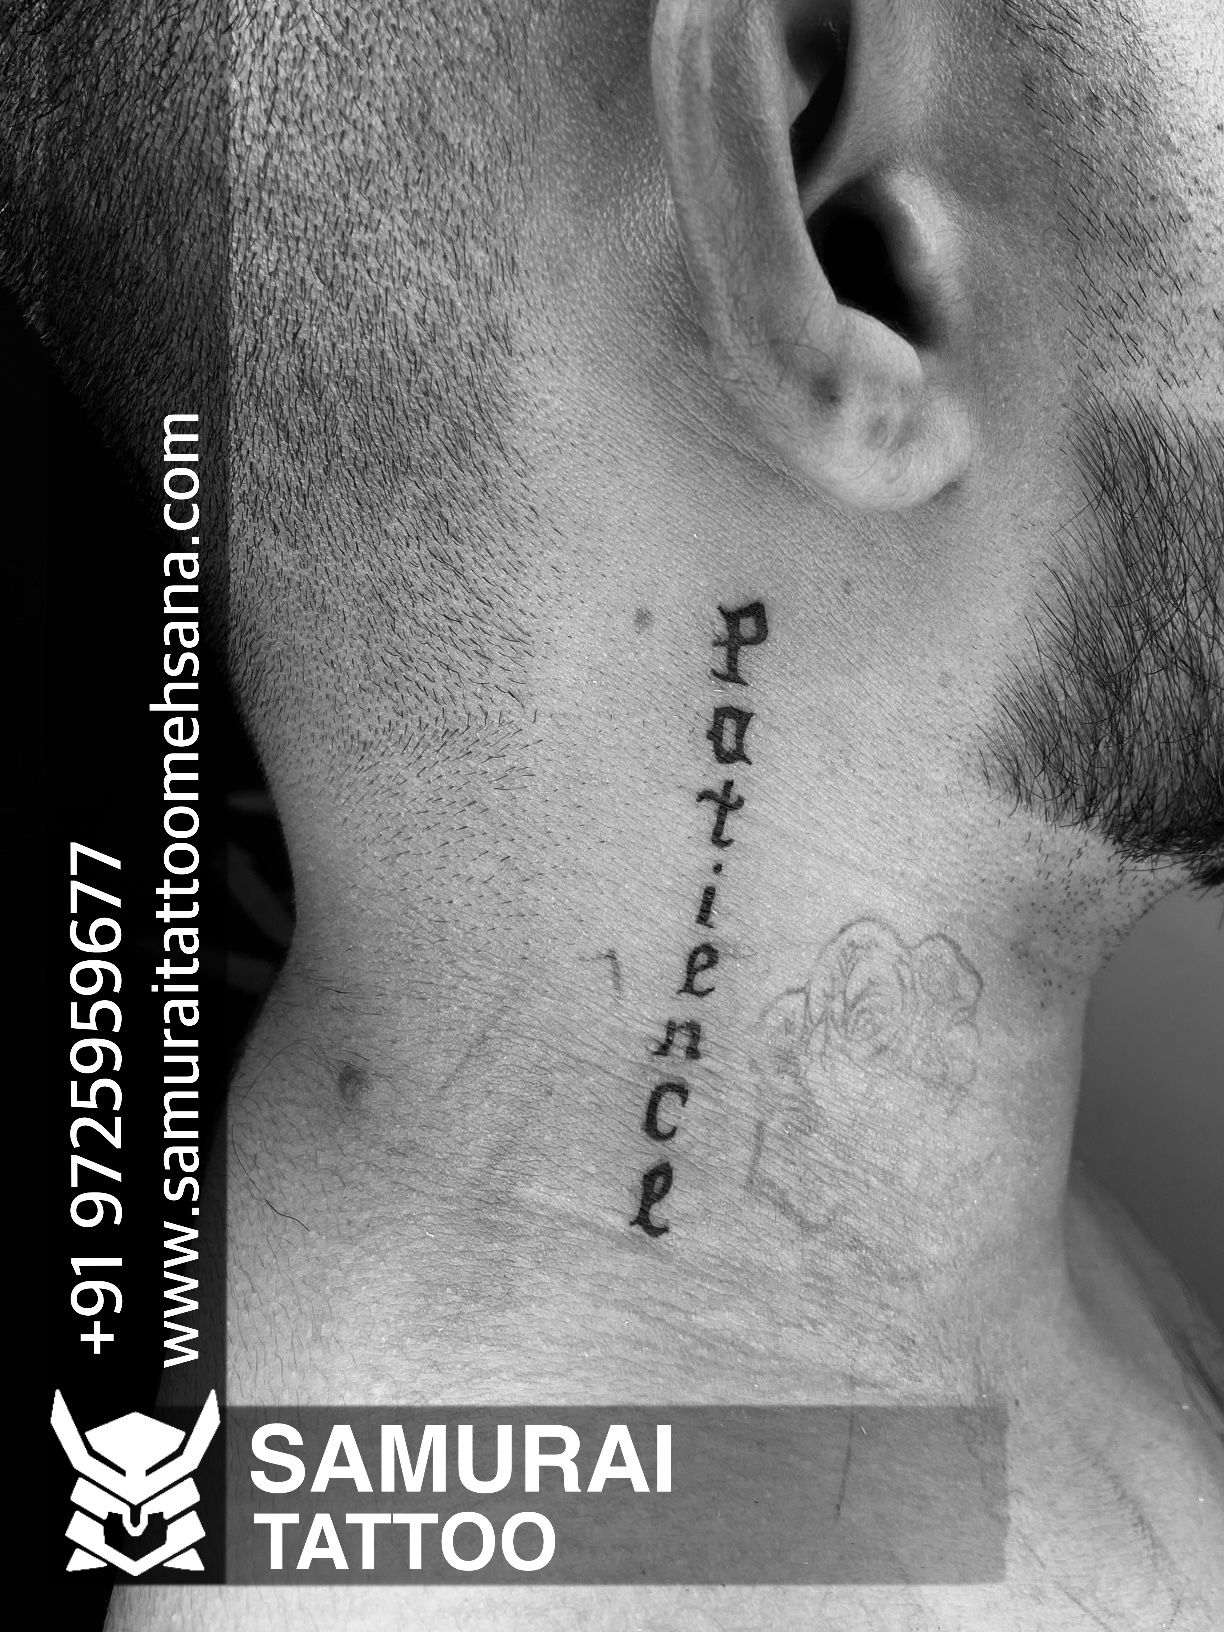 Justin Biebers Patience Neck Tattoo  A Closer Look at Justin Biebers  70 Tattoo Collection  POPSUGAR Beauty Photo 8